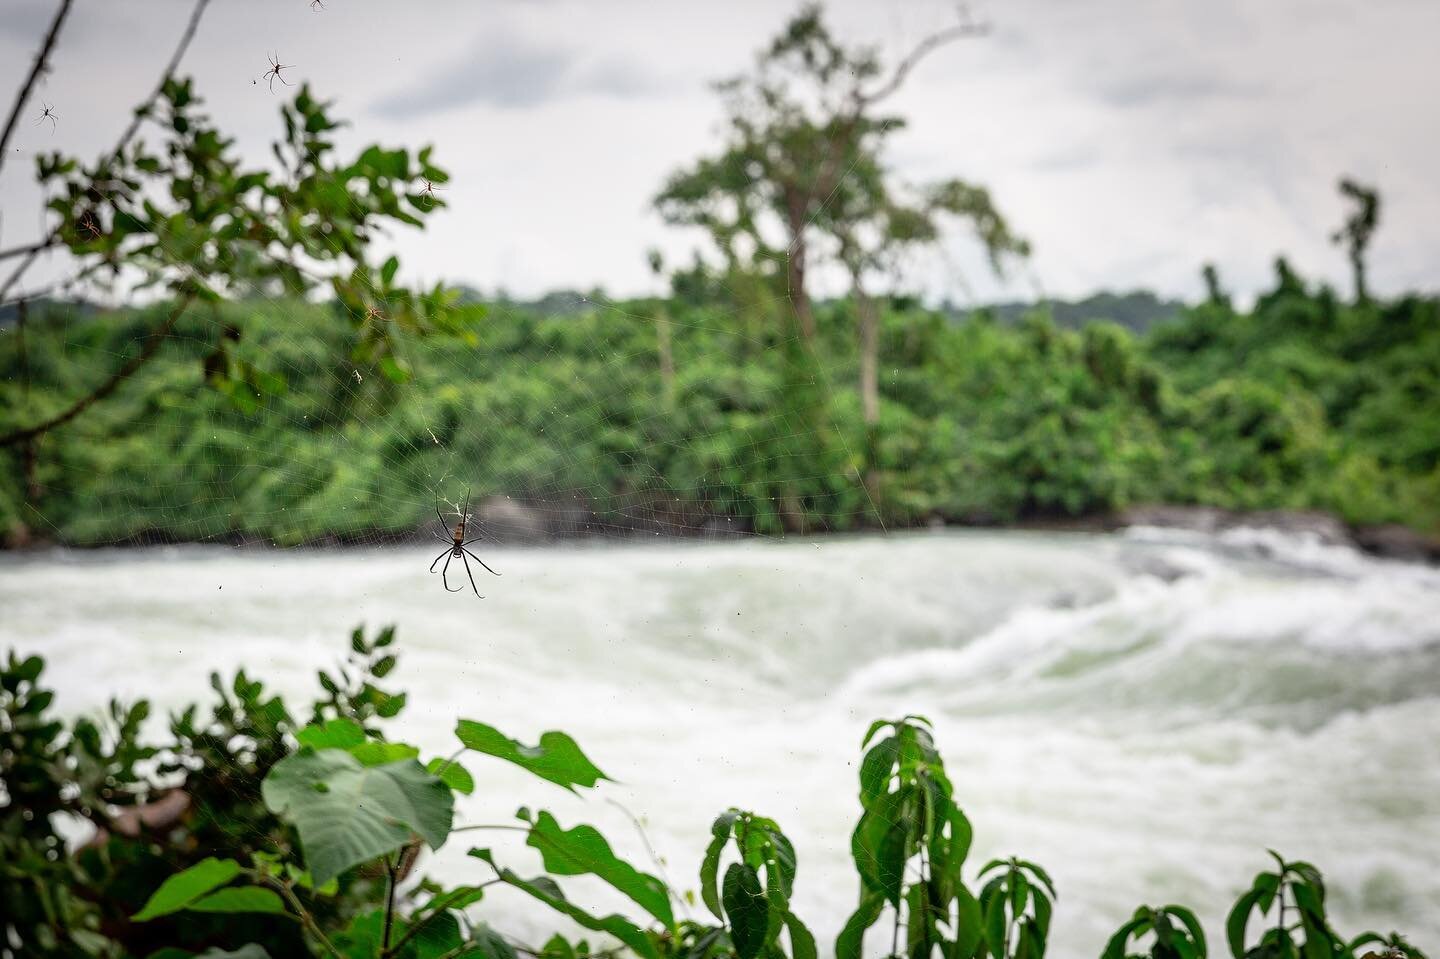 It was spider city along the banks of the river. And of course after this, I saw them everywhere including the grounds of where I was staying. Thankfully, they stayed in their webs..lol.
.
.
.
#itandafalls #jinja #uganda #travelphotography #travel